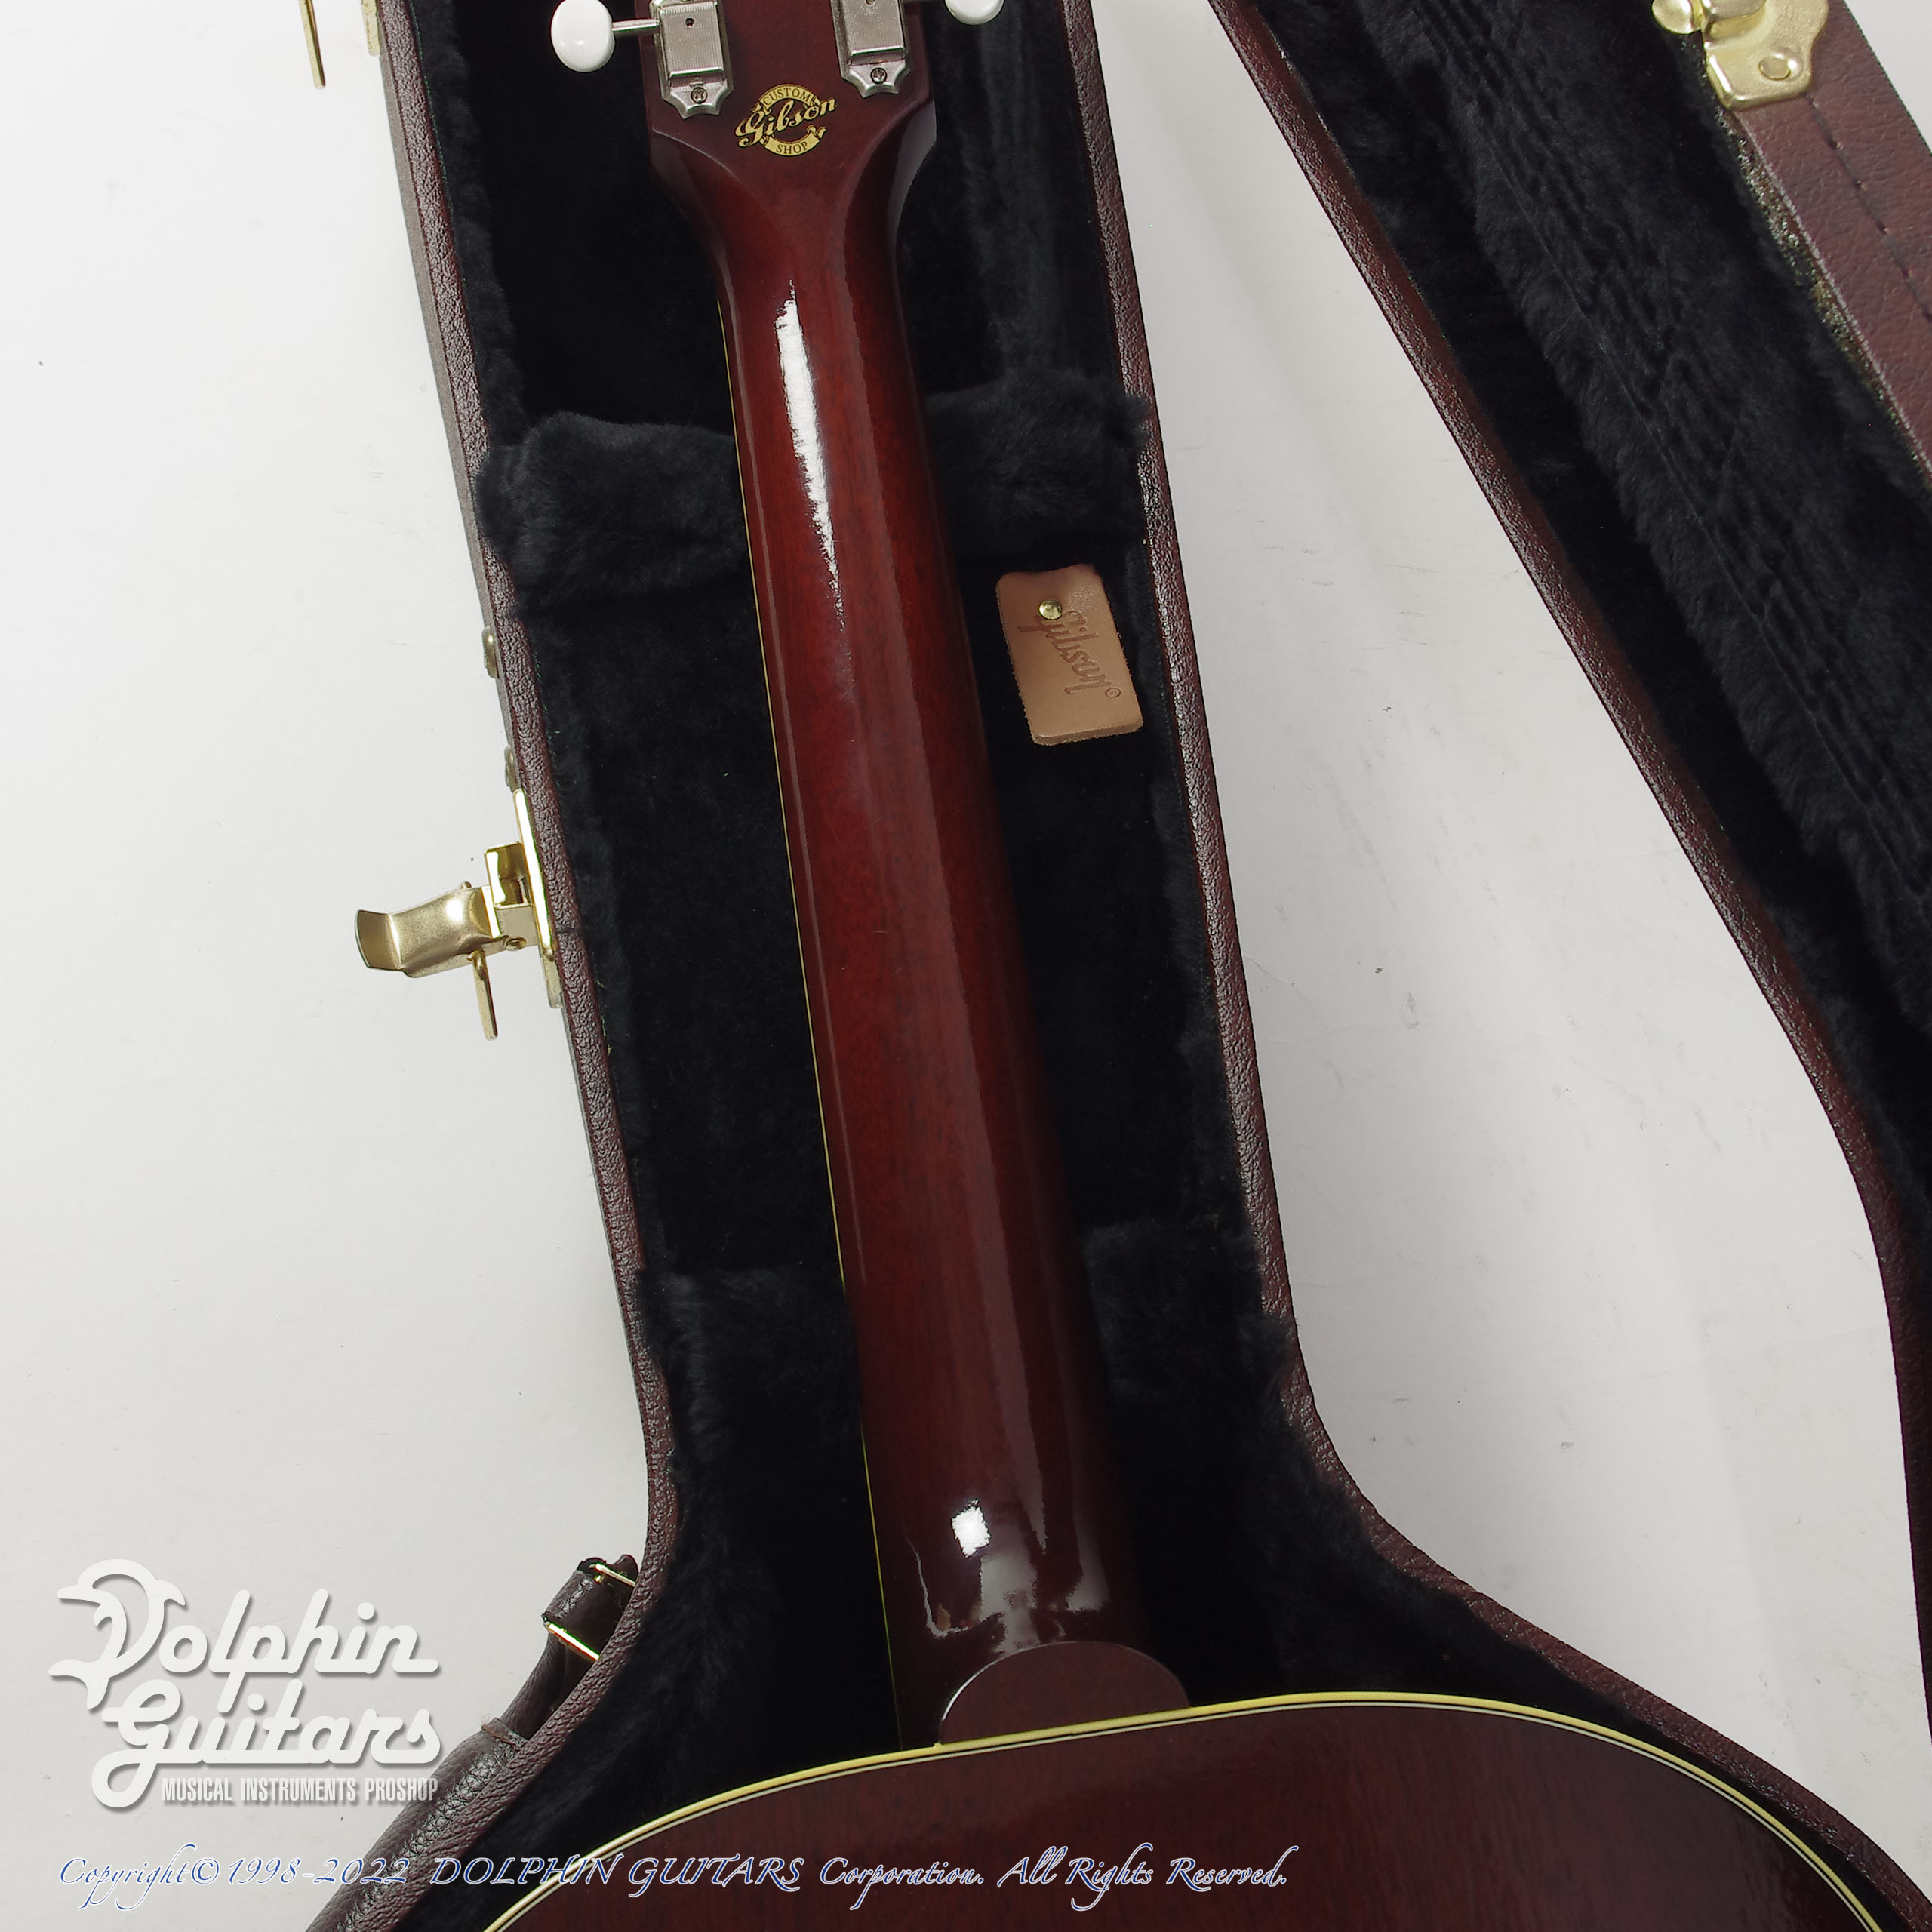 Gibson 1959 Southern Jumbo (Thermally Aged Sitka Spruce